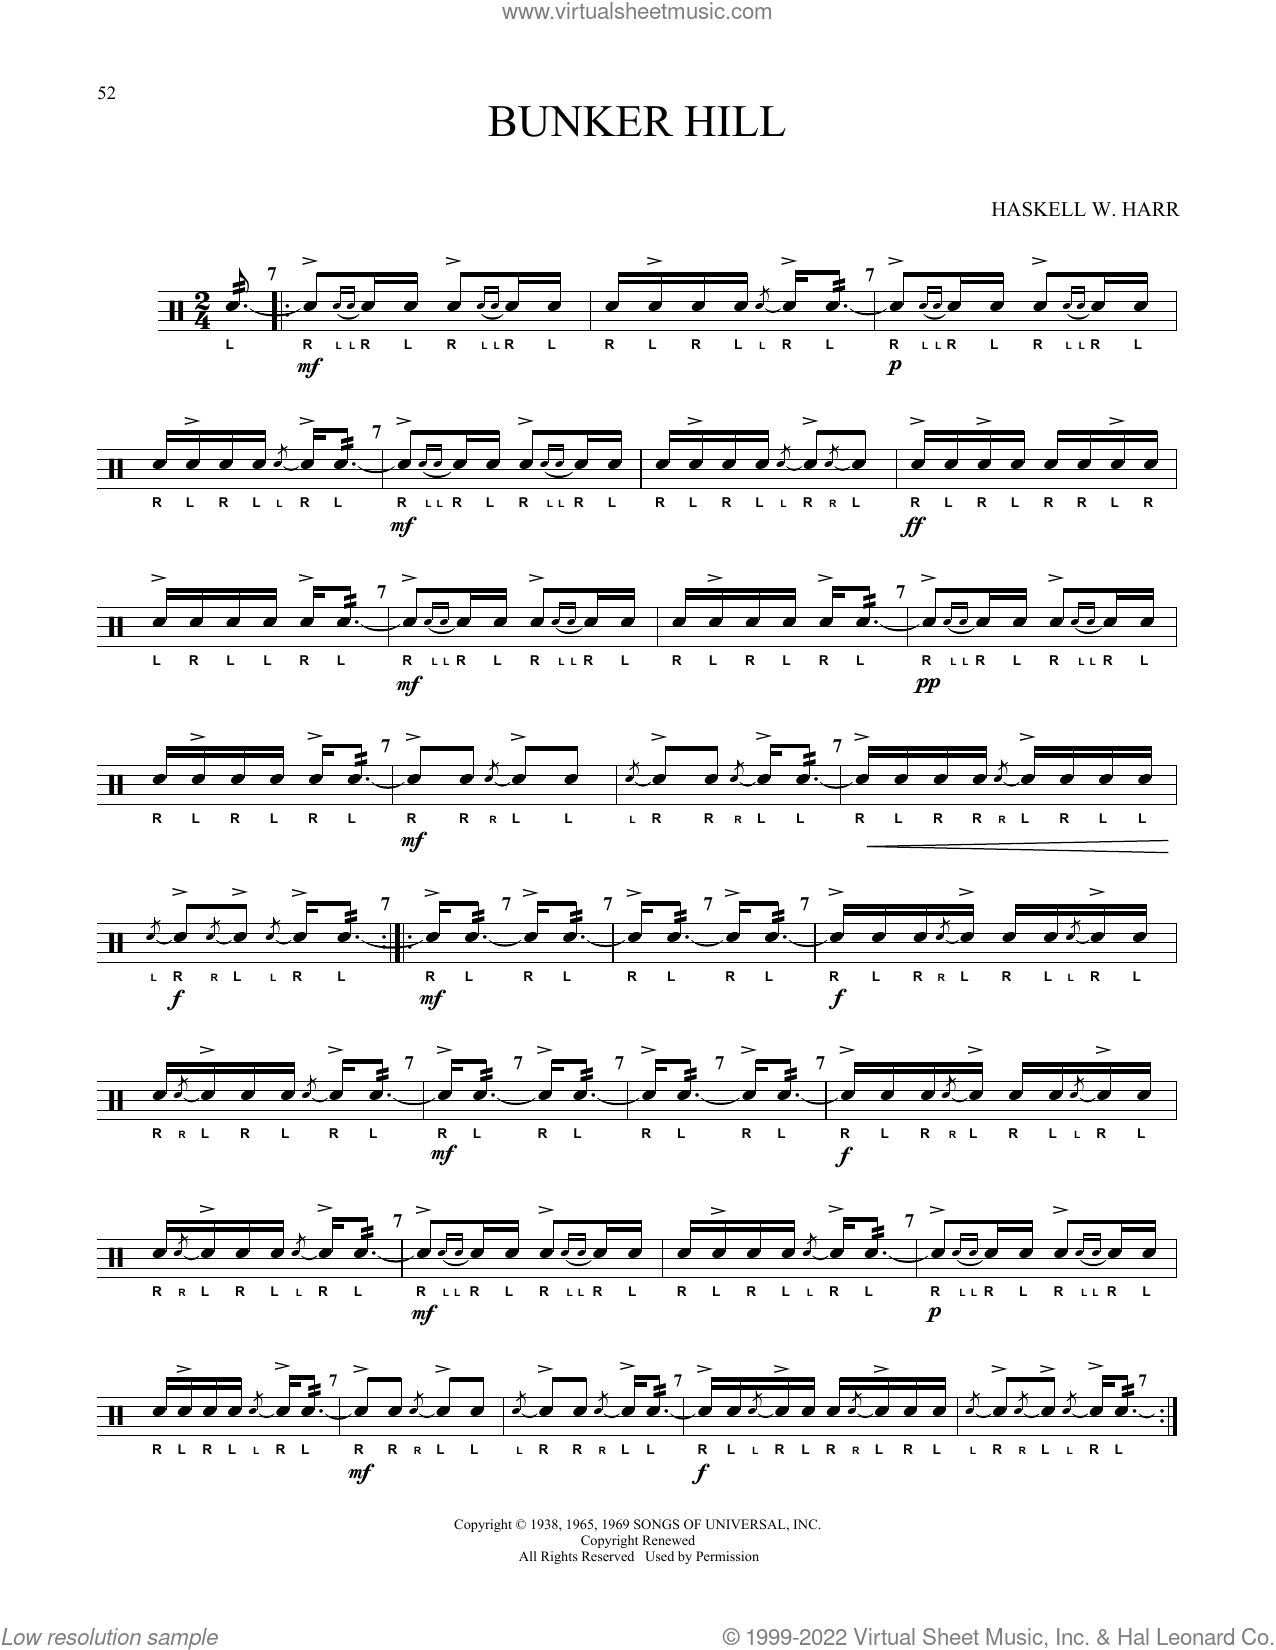 Friend, Please Sheet music for Drum group (Solo)